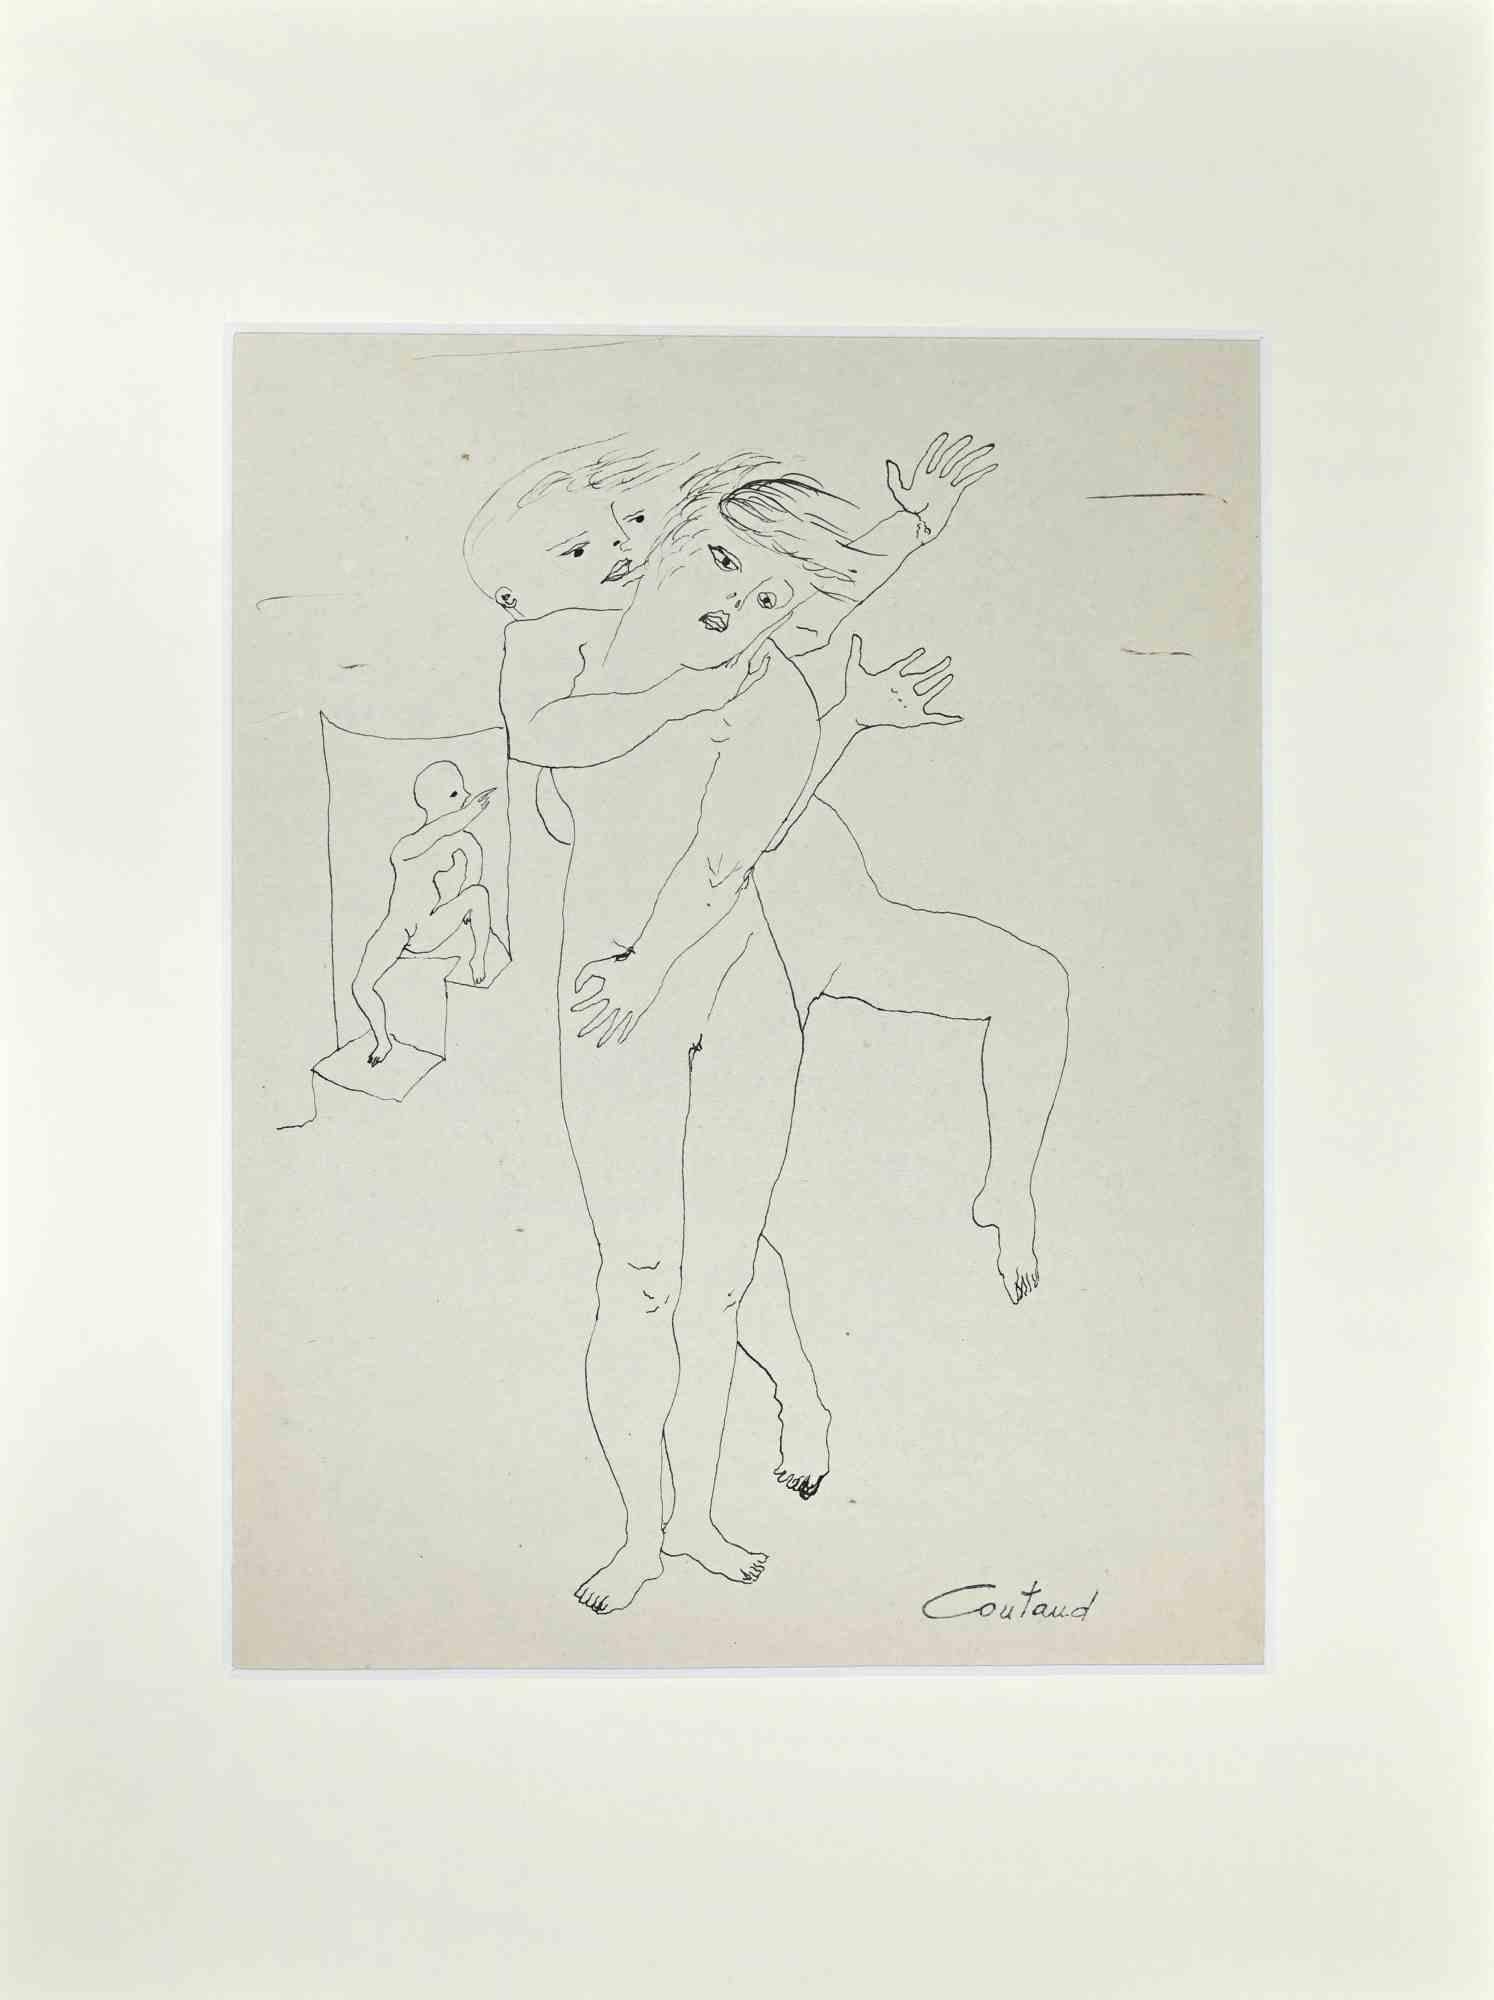 Nudes is an original China ink drawing on paper realized by Lucien Coutaud in the Mid-20th Century.

Hand-signed.

Good conditions.

The artwork is depicted through soft stokes in a well-balanced composition.